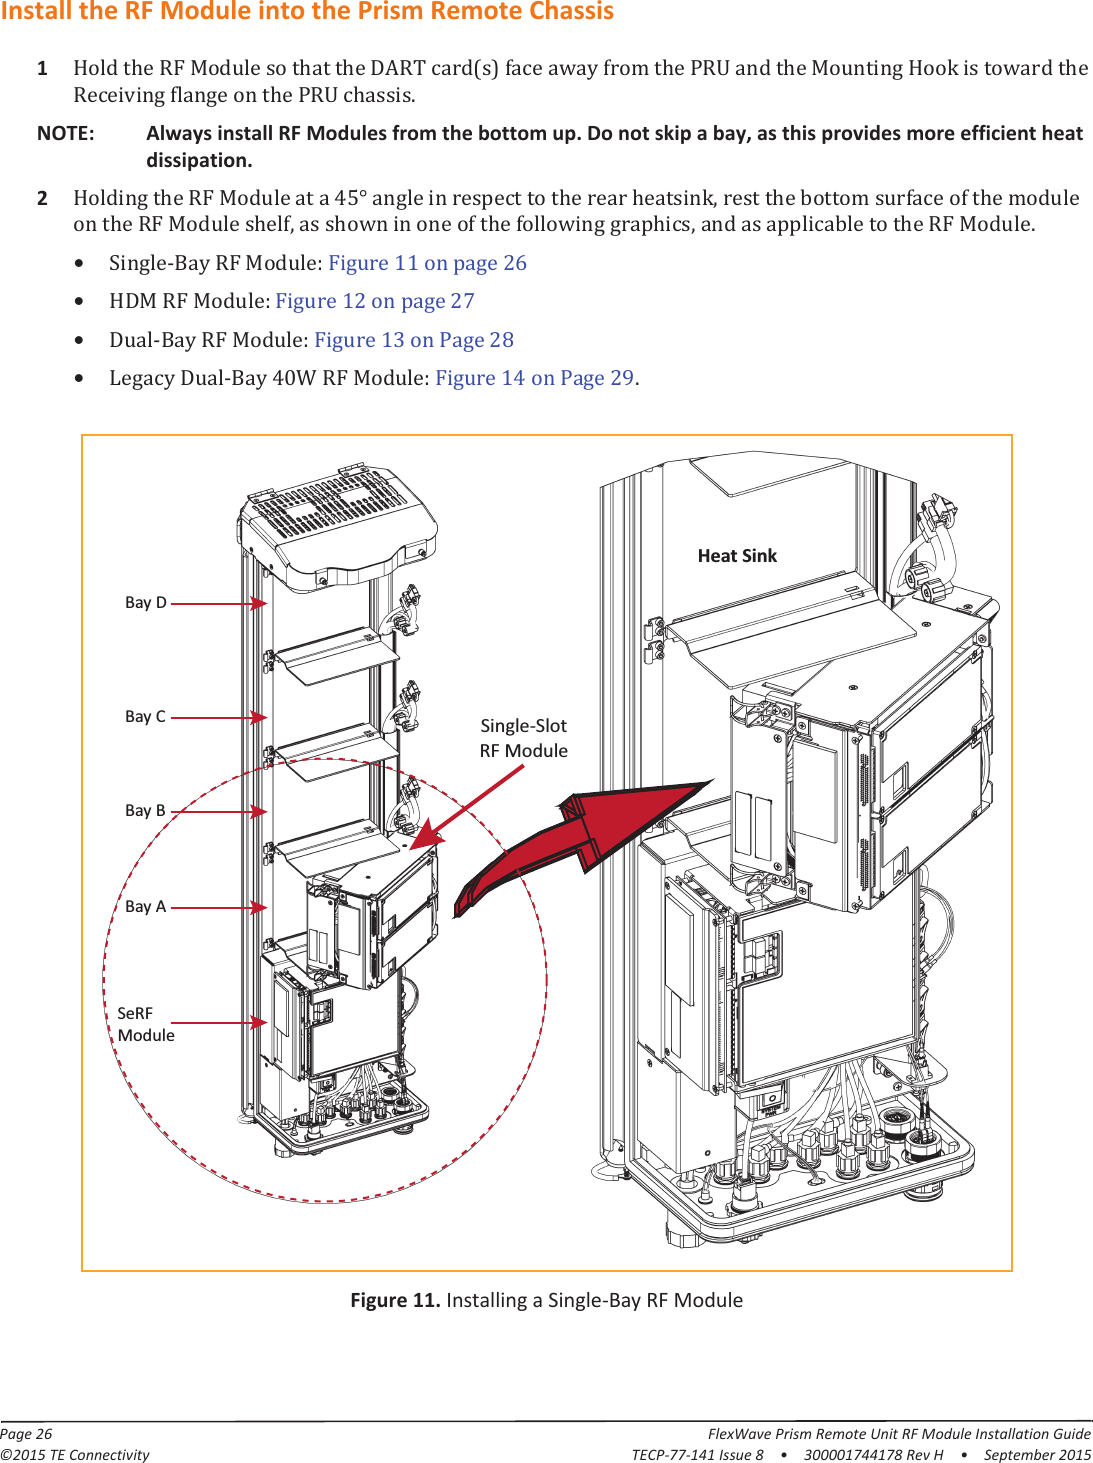 Page 26 FlexWave Prism Remote Unit RF Module Installation Guide©2015 TE Connectivity TECP-77-141 Issue 8  •  300001744178 Rev H  •  September 2015Install the RF Module into the Prism Remote Chassis1ȋȌǤNOTE: Always install RF Modules from the bottom up. Do not skip a bay, as this provides more efficient heat dissipation.2ͶͷιǡǡǡǤ•Ǧǣͳͳʹ͸•ǣͳʹʹ͹•Ǧǣͳ͵ʹͺ•ǦͶͲǣͳͶʹͻǤFigure 11. Installing a Single-Bay RF ModuleBay CBay DSeRFModuleBay ABay BSingle-SlotRF ModuleHeat Sink 